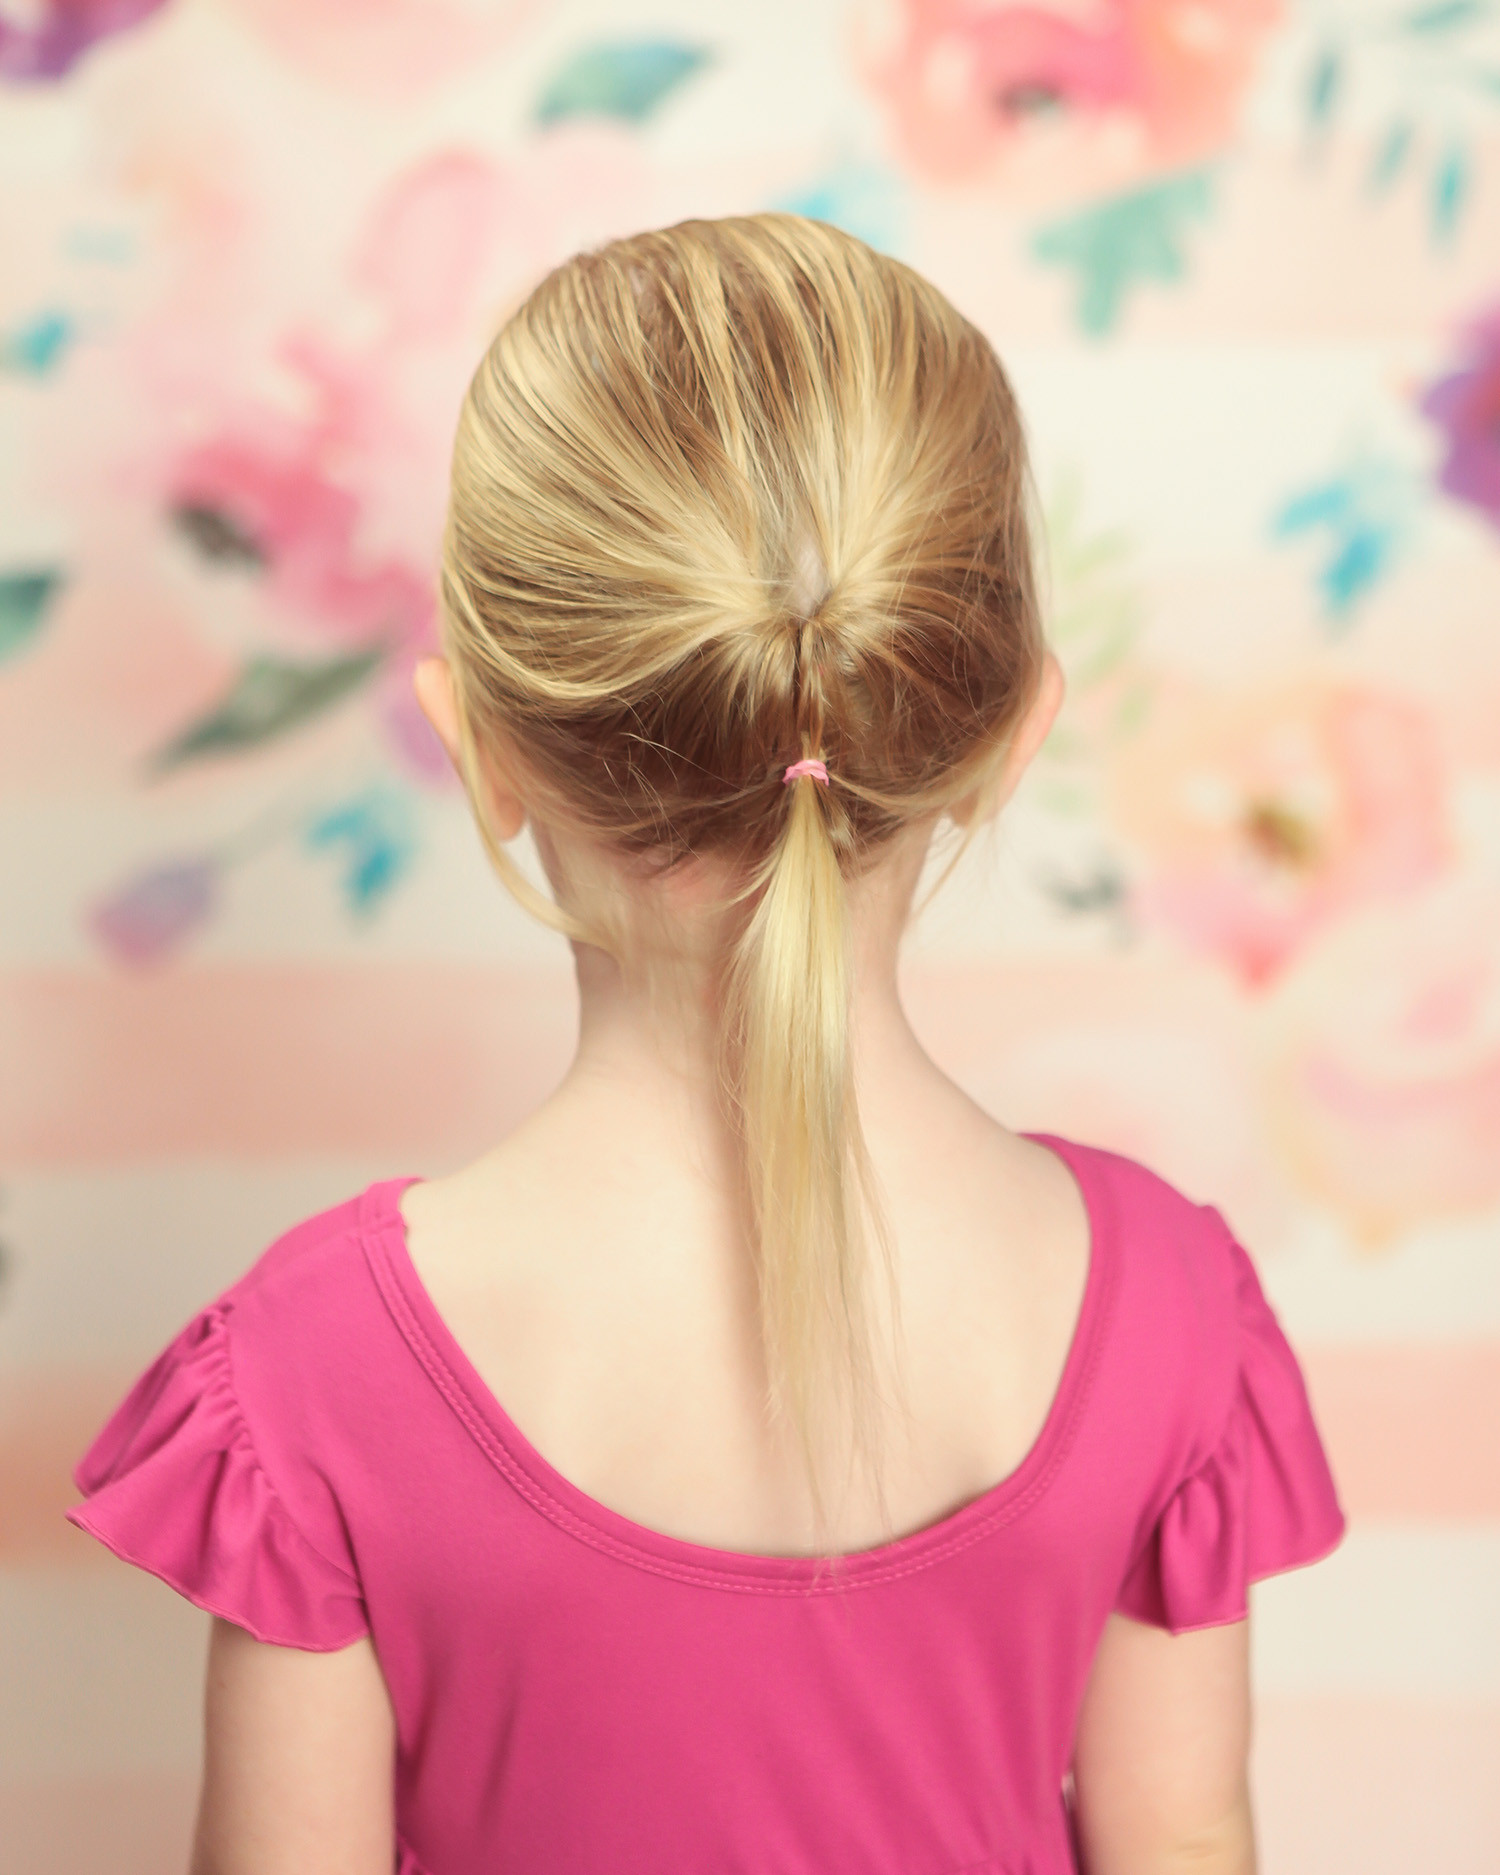 Ponytail Hairstyles For Kids
 Toddler Hairstyles 5 Ways to Dress Up a Kids Ponytail